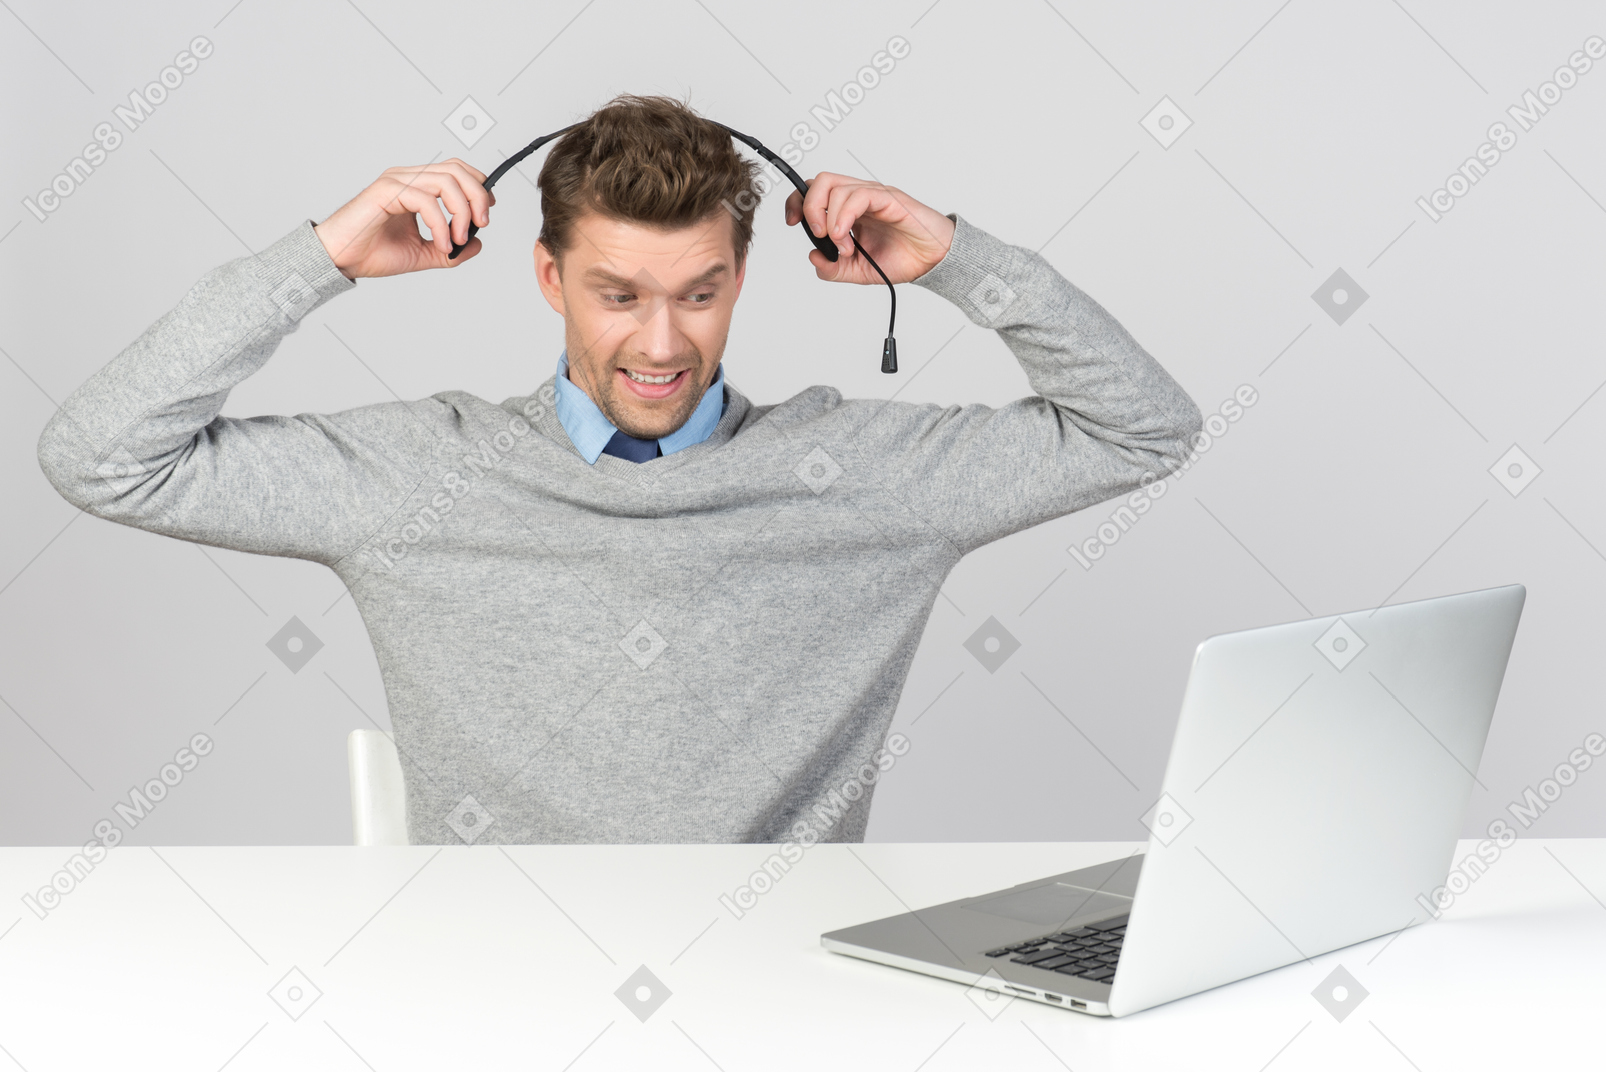 Call center agent pulling off his headset while working on computer